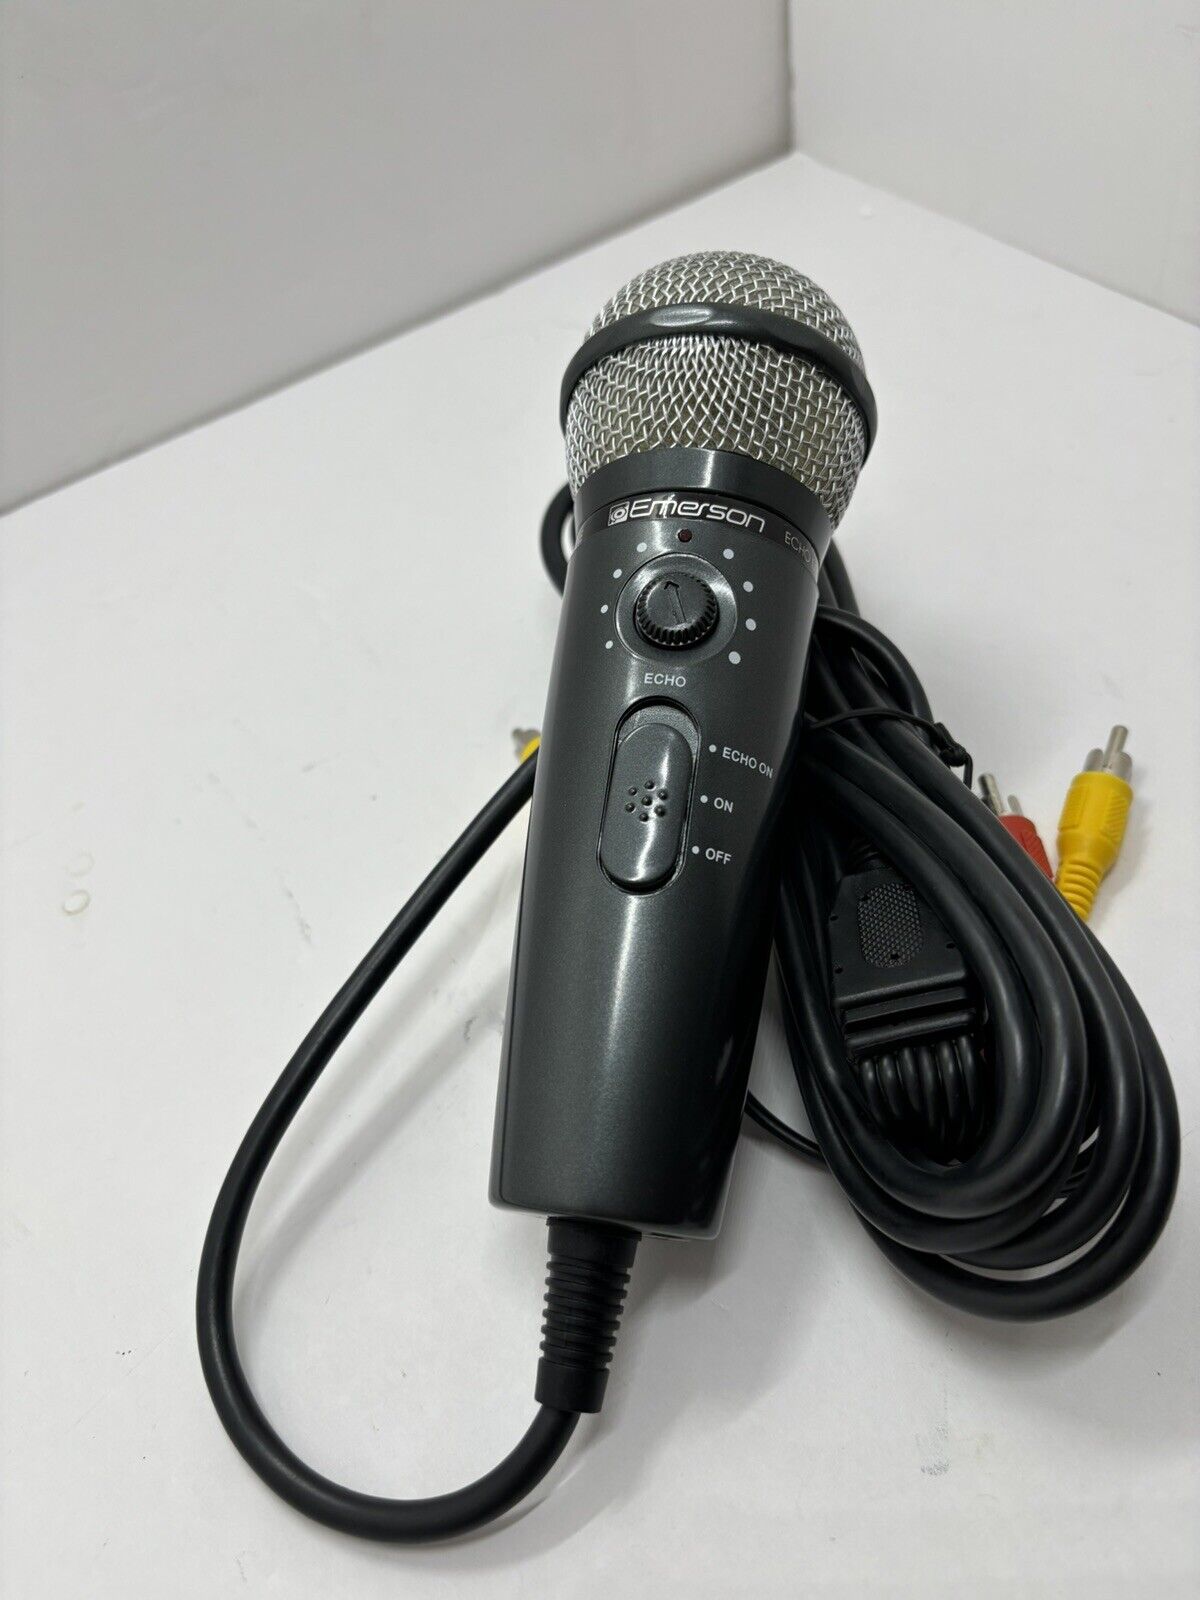 Emerson Echo Microphone With All Attachments! New No Box! Nice One!! L@@K!!. Available Now for $14.95